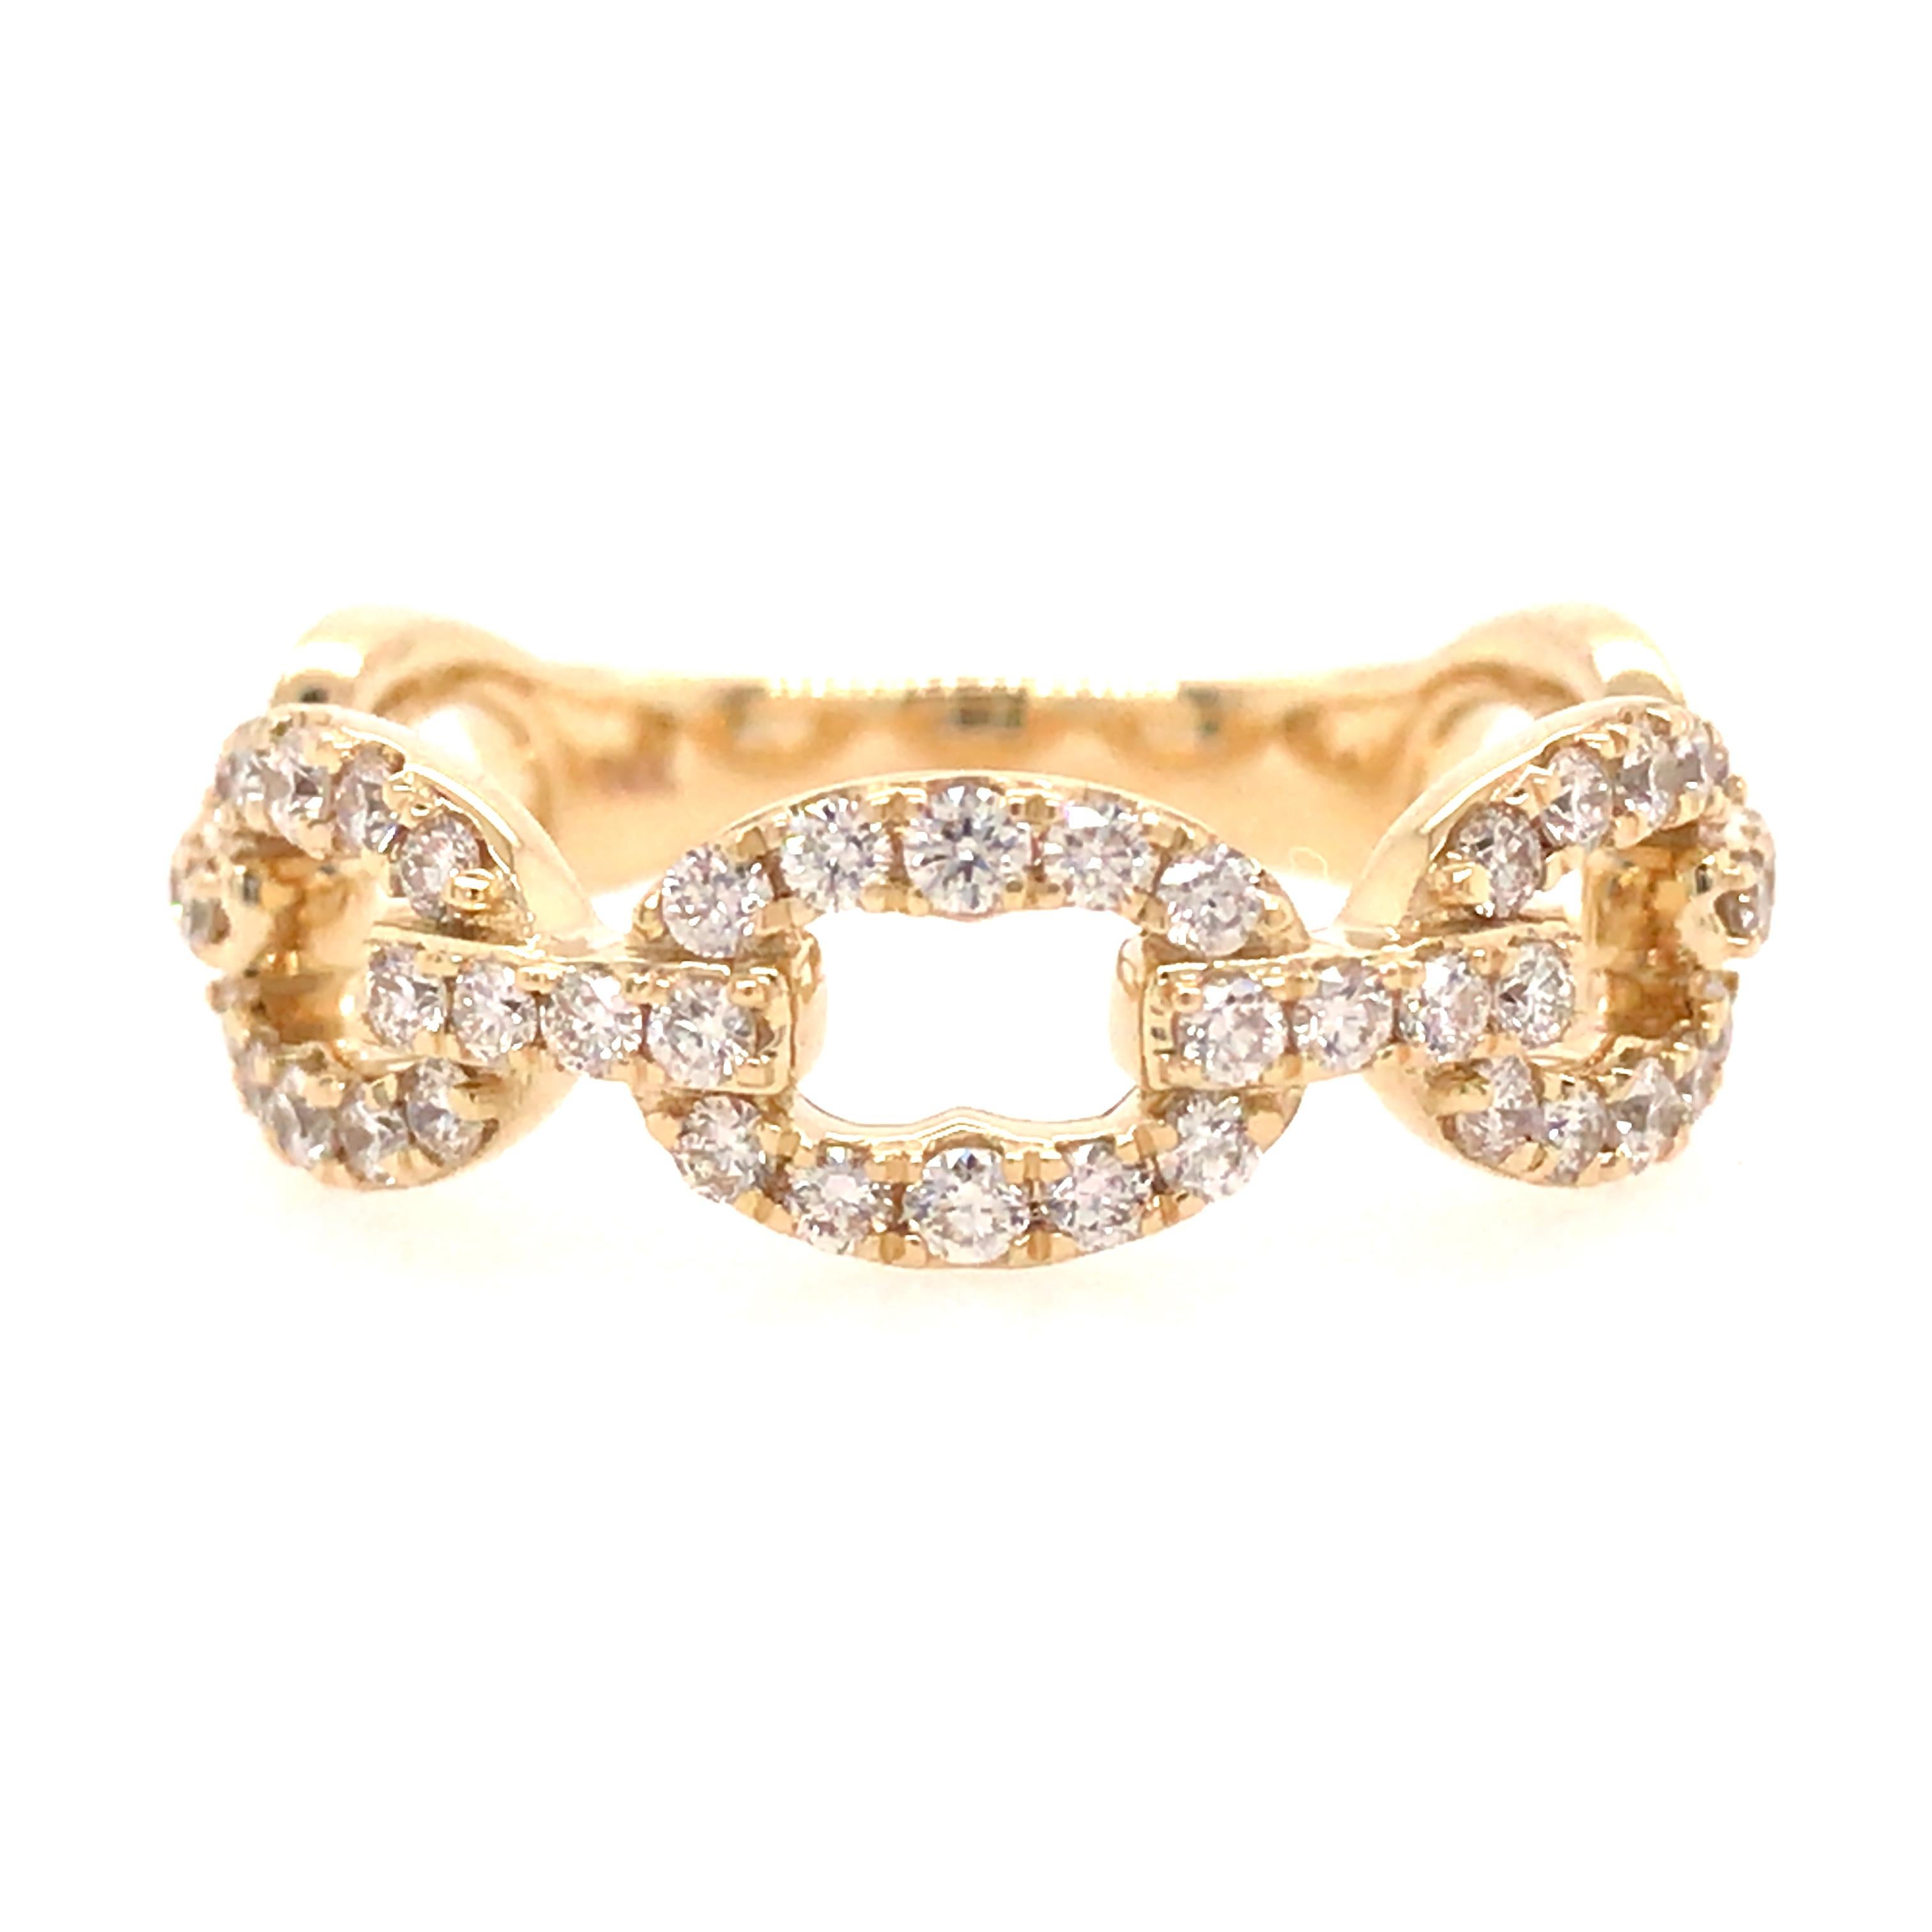 Diamond Link Band 14K Yellow Gold.  (46) Round Brilliant Cut Diamonds weighing 0.47 carat total weight, G-H in color and VS in clarity are expertly set.  The Ring measures 1/4 inch in width. 3.57 grams.